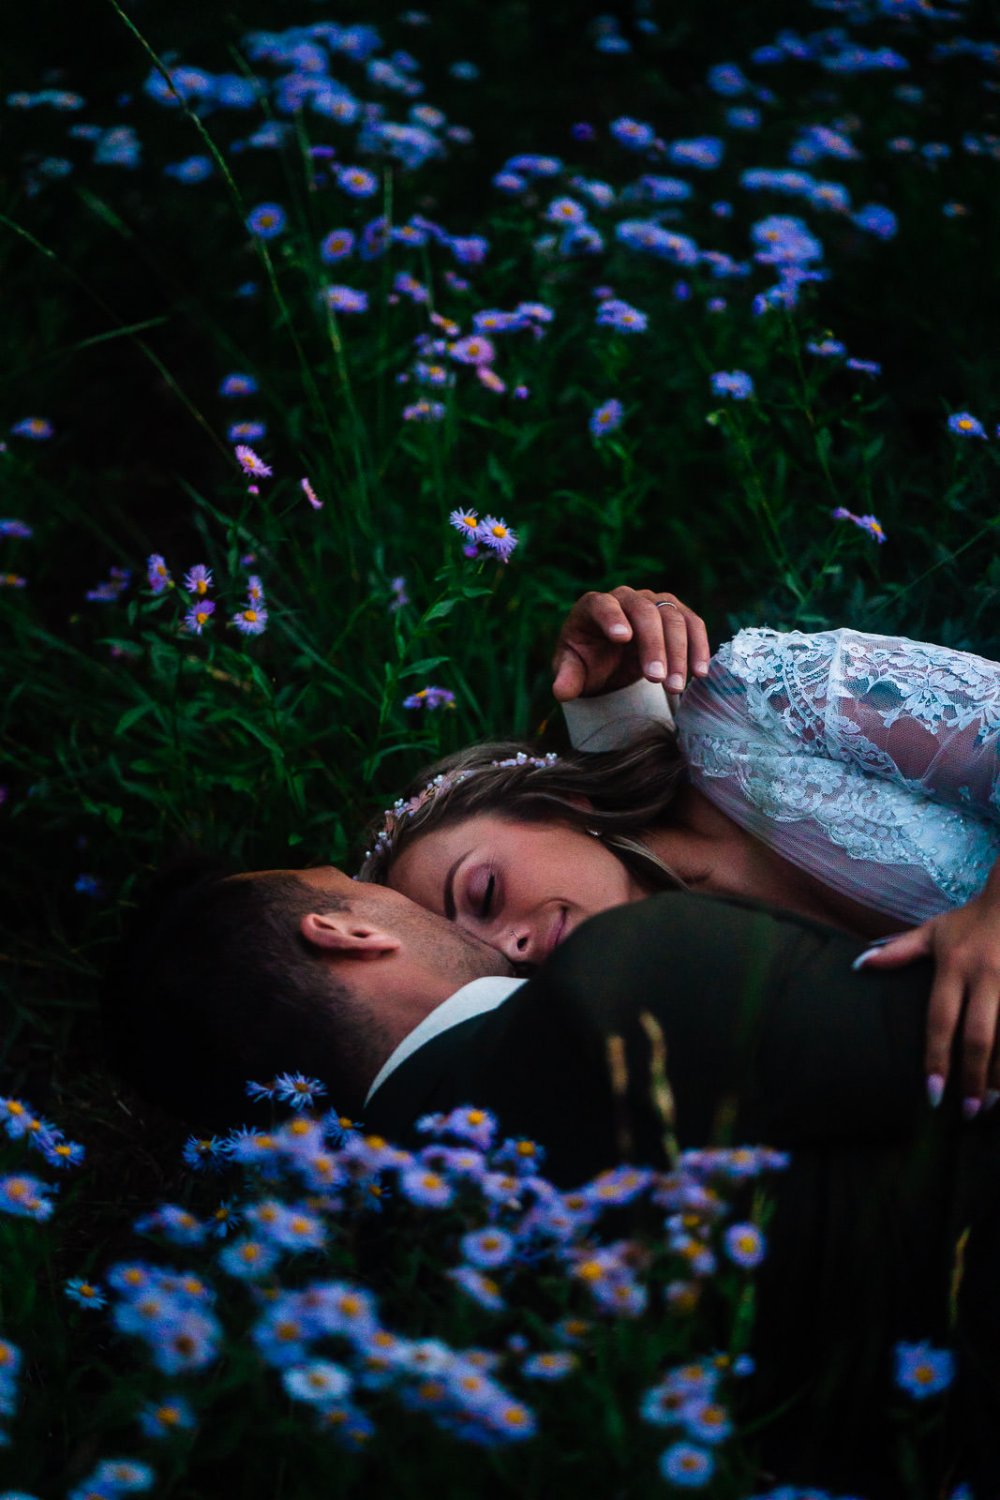 Capturing intimate elopement photos of a bride and groom peacefully lying in a field of flowers.